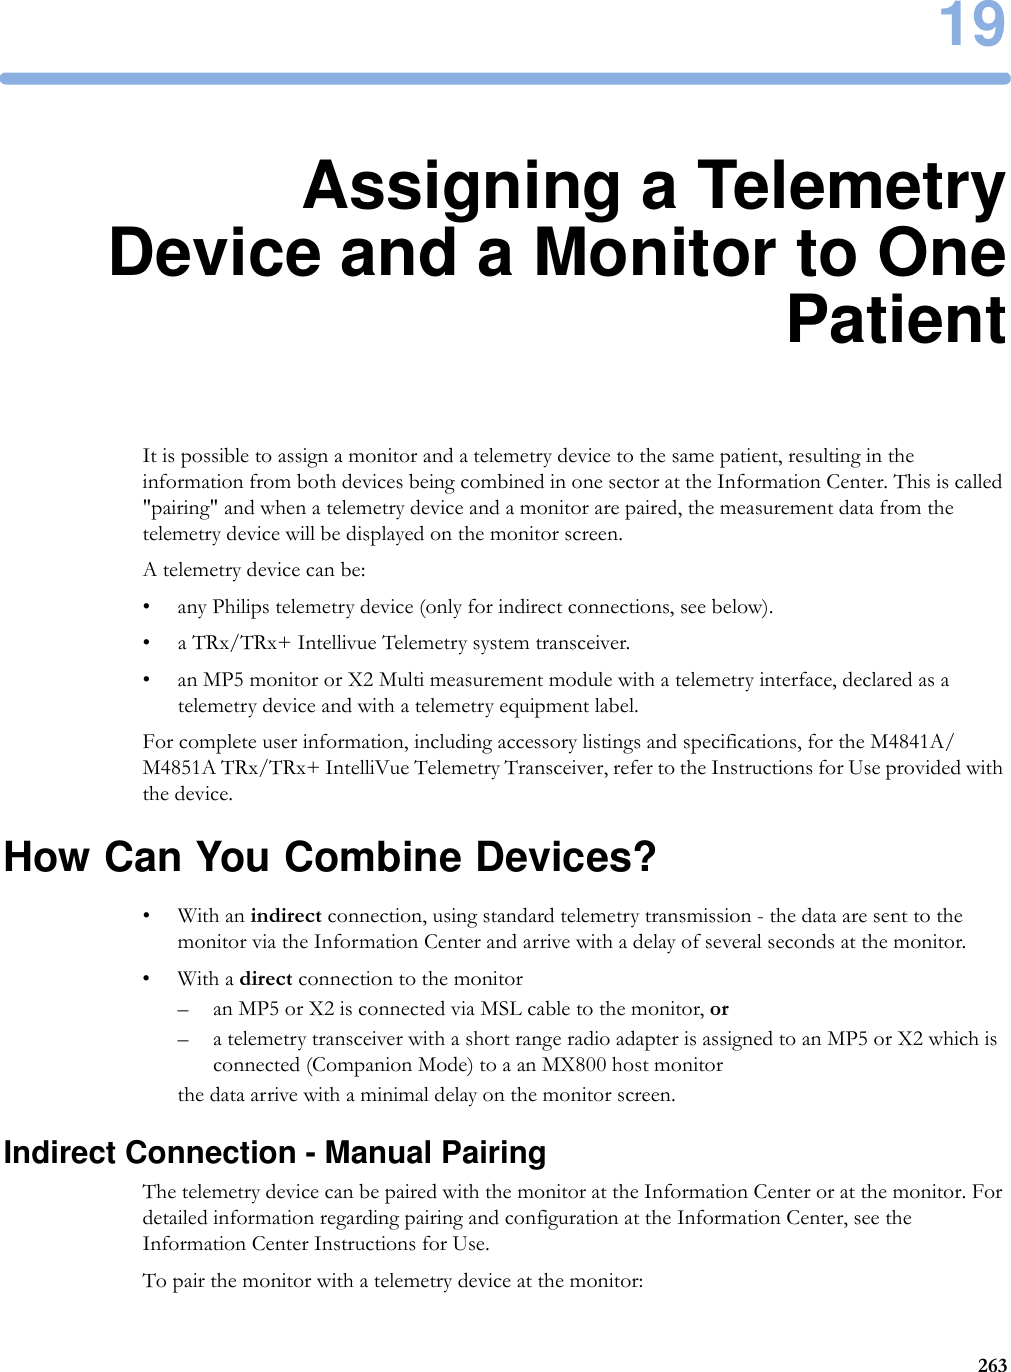 1926319Assigning a TelemetryDevice and a Monitor to OnePatientIt is possible to assign a monitor and a telemetry device to the same patient, resulting in the information from both devices being combined in one sector at the Information Center. This is called &quot;pairing&quot; and when a telemetry device and a monitor are paired, the measurement data from the telemetry device will be displayed on the monitor screen.A telemetry device can be:• any Philips telemetry device (only for indirect connections, see below).• a TRx/TRx+ Intellivue Telemetry system transceiver.• an MP5 monitor or X2 Multi measurement module with a telemetry interface, declared as a telemetry device and with a telemetry equipment label.For complete user information, including accessory listings and specifications, for the M4841A/M4851A TRx/TRx+ IntelliVue Telemetry Transceiver, refer to the Instructions for Use provided with the device.How Can You Combine Devices?•With an indirect connection, using standard telemetry transmission - the data are sent to the monitor via the Information Center and arrive with a delay of several seconds at the monitor.•With a direct connection to the monitor– an MP5 or X2 is connected via MSL cable to the monitor, or– a telemetry transceiver with a short range radio adapter is assigned to an MP5 or X2 which is connected (Companion Mode) to a an MX800 host monitorthe data arrive with a minimal delay on the monitor screen.Indirect Connection - Manual PairingThe telemetry device can be paired with the monitor at the Information Center or at the monitor. For detailed information regarding pairing and configuration at the Information Center, see the Information Center Instructions for Use.To pair the monitor with a telemetry device at the monitor: